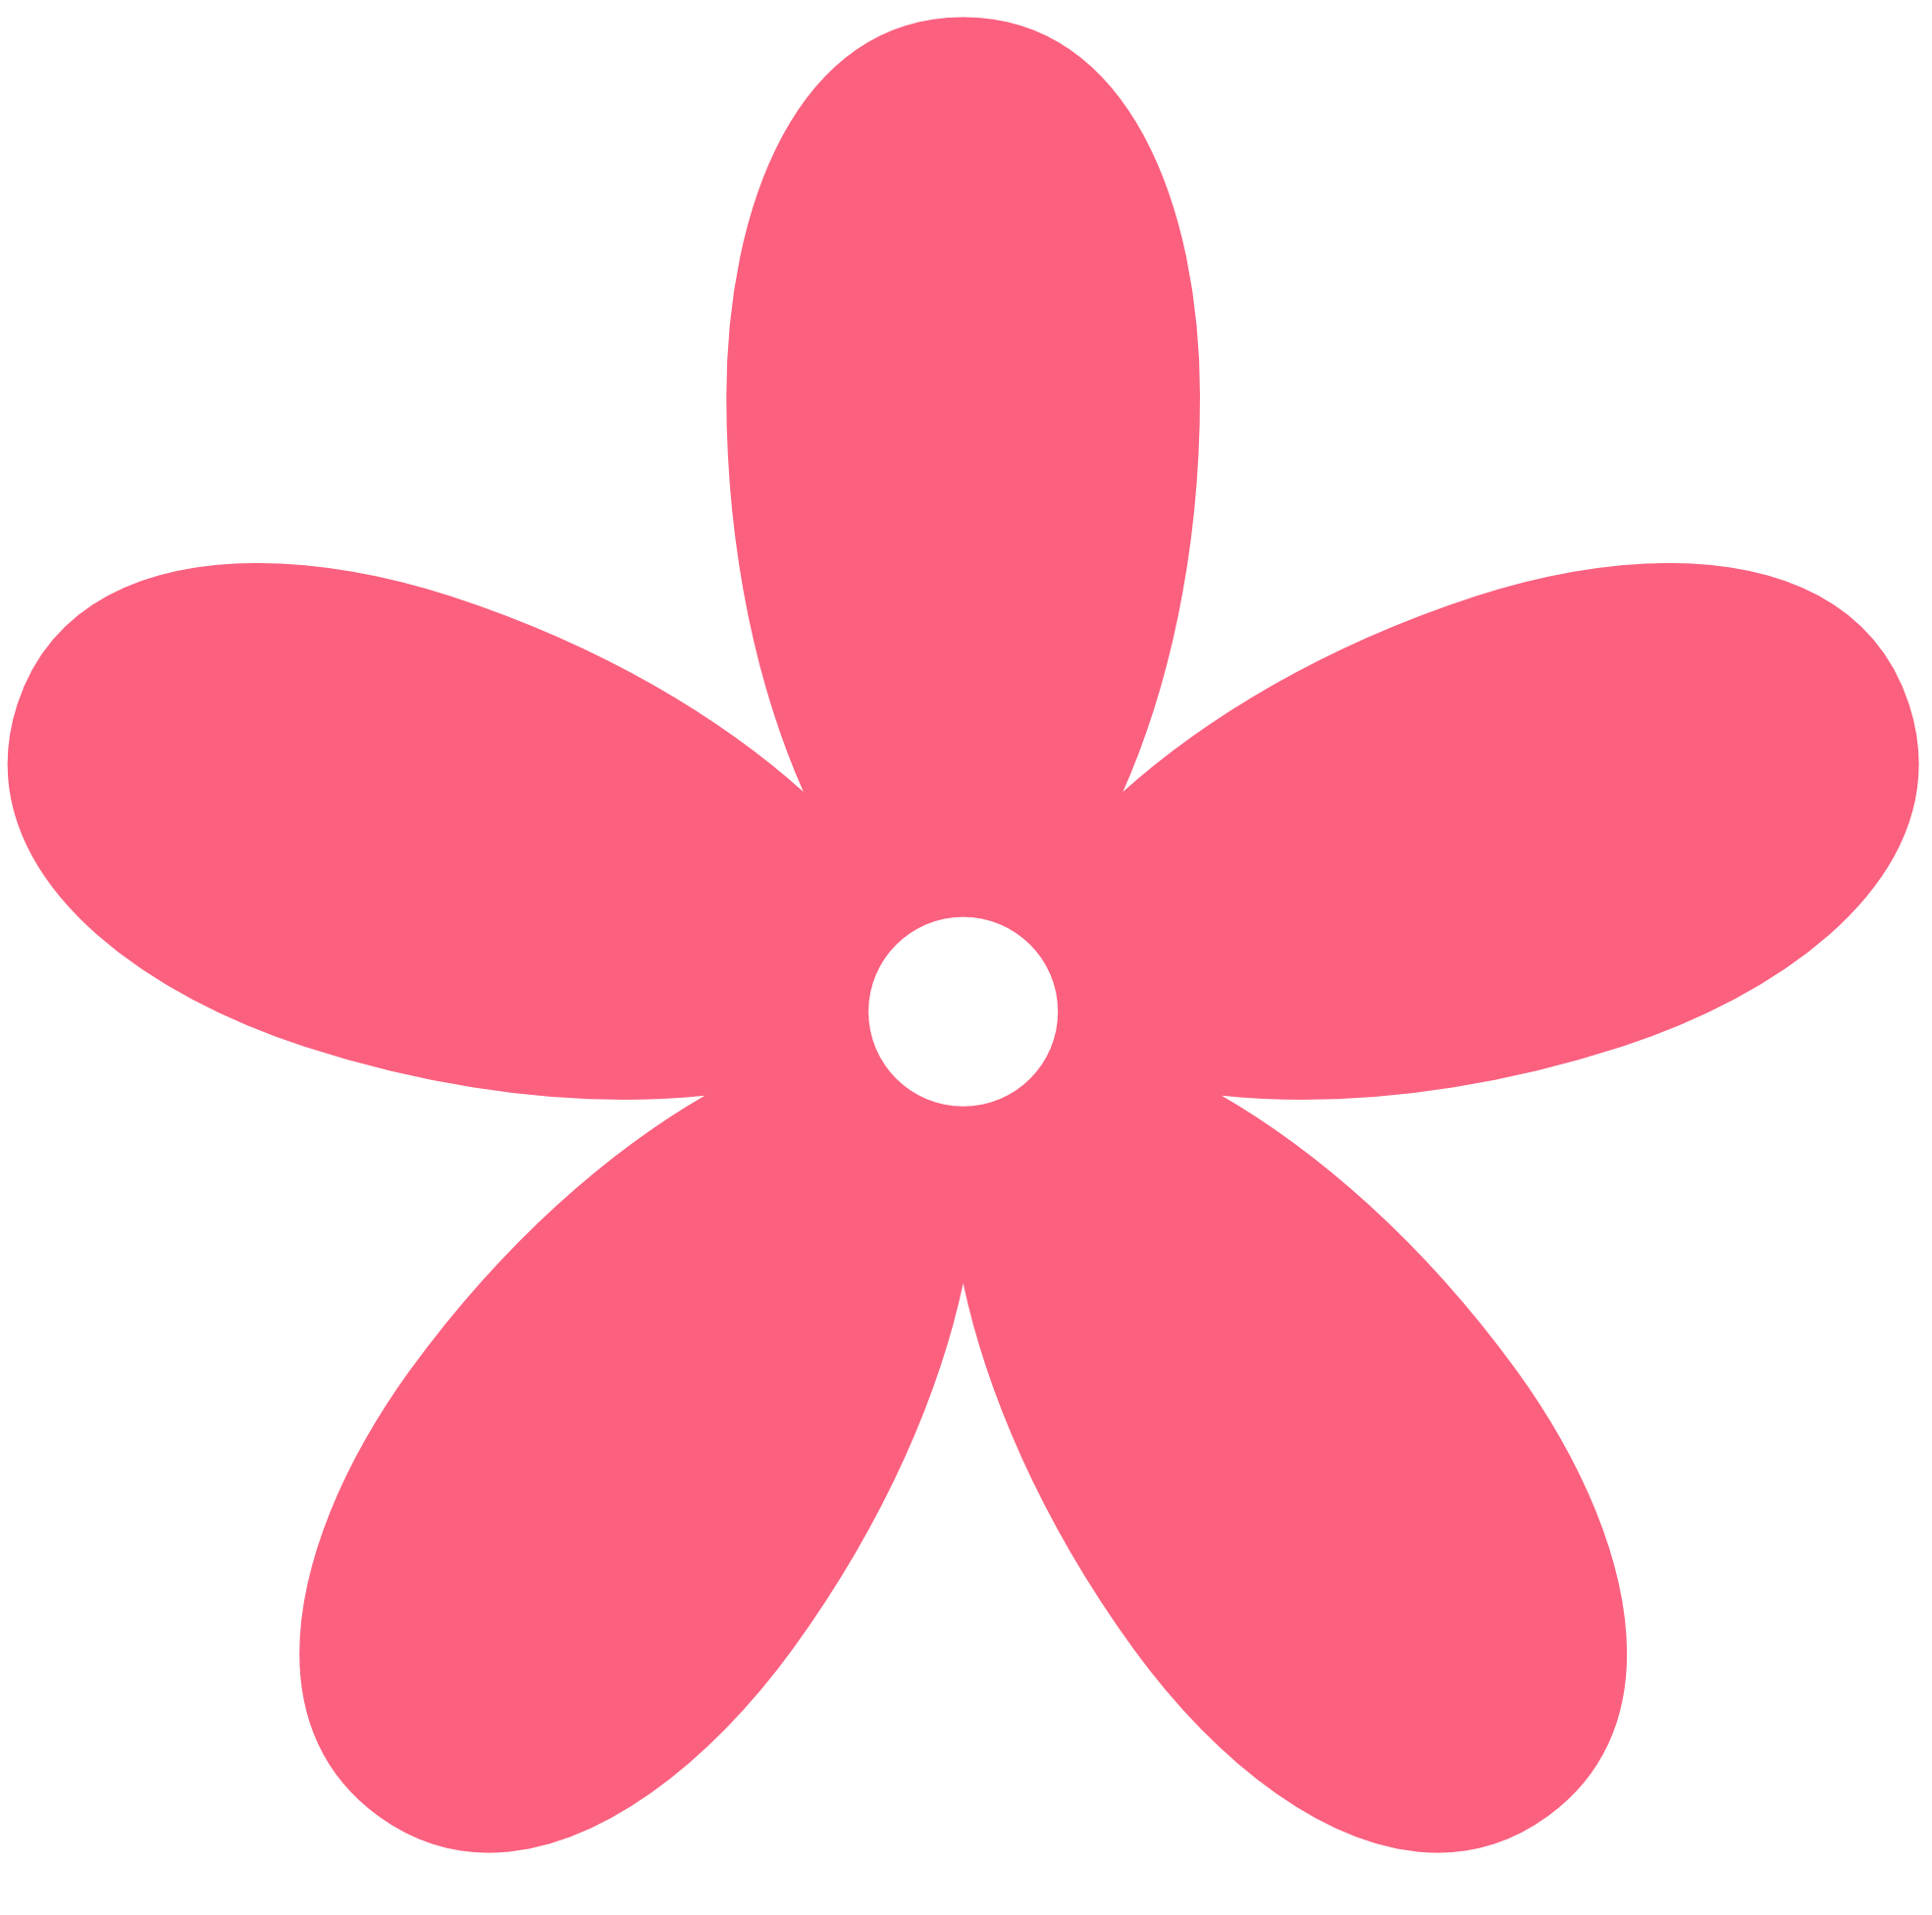 Flowers hot pink flower clipart free clipart images.